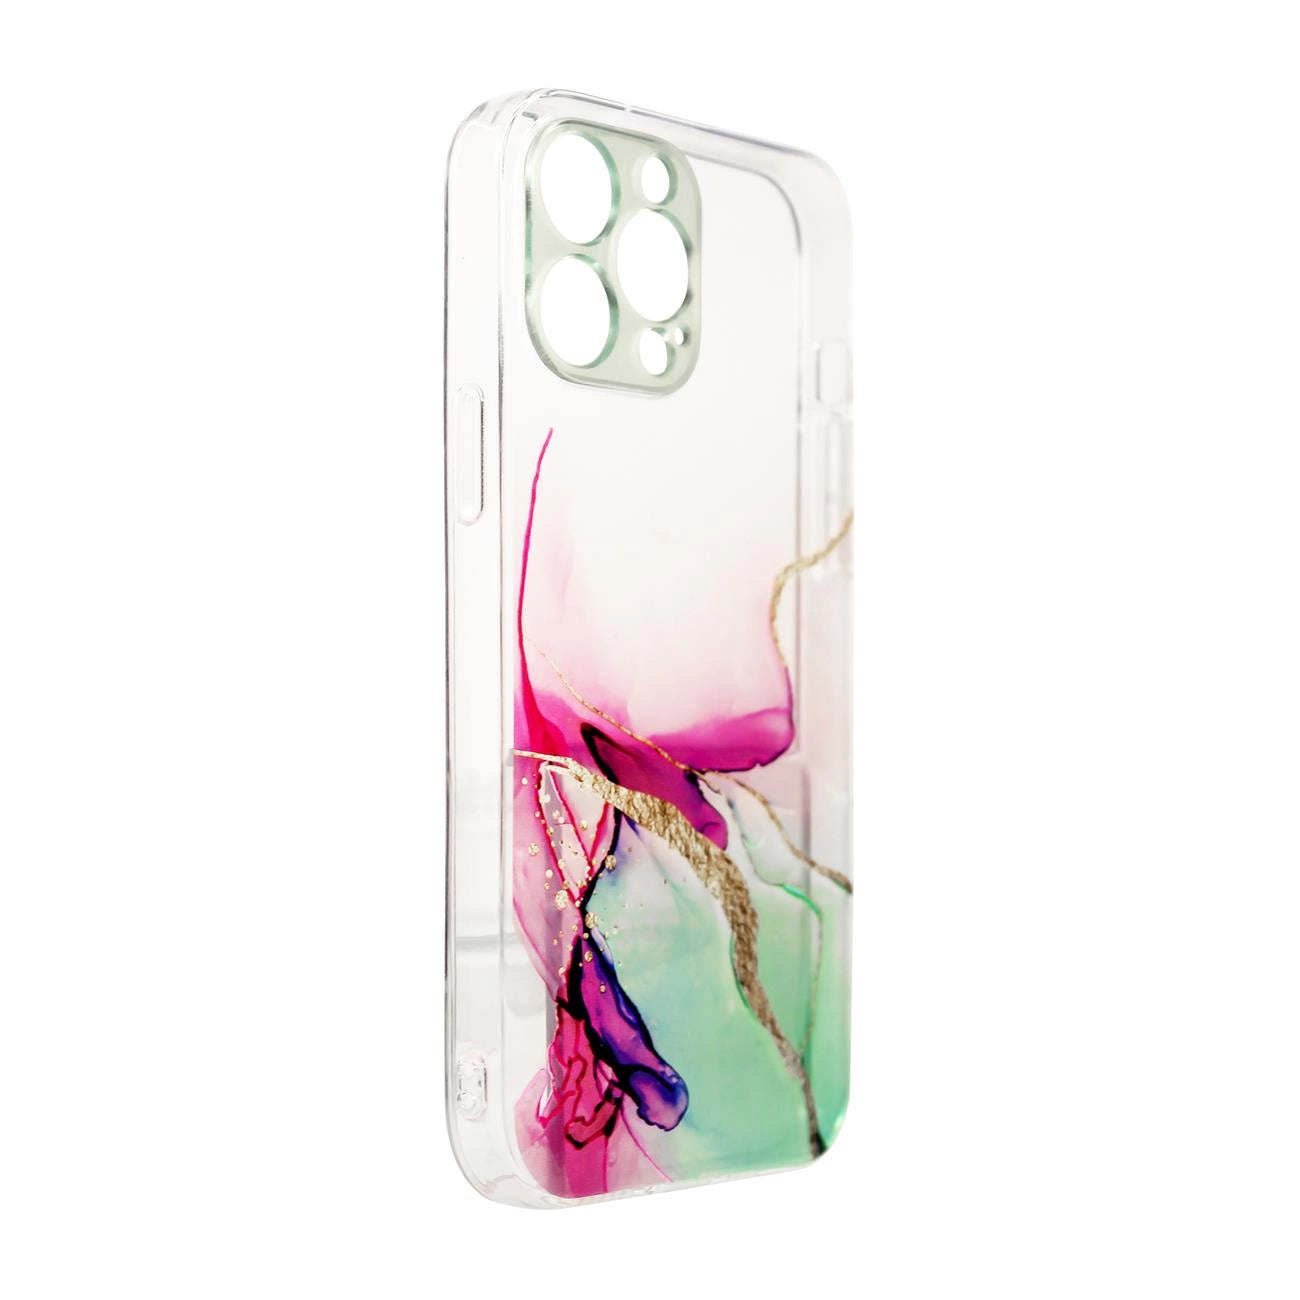 iPhone 12 Pro Max Marble Case for - Transparent Gel Cover with Marble Pattern in Mint - MIZO.at